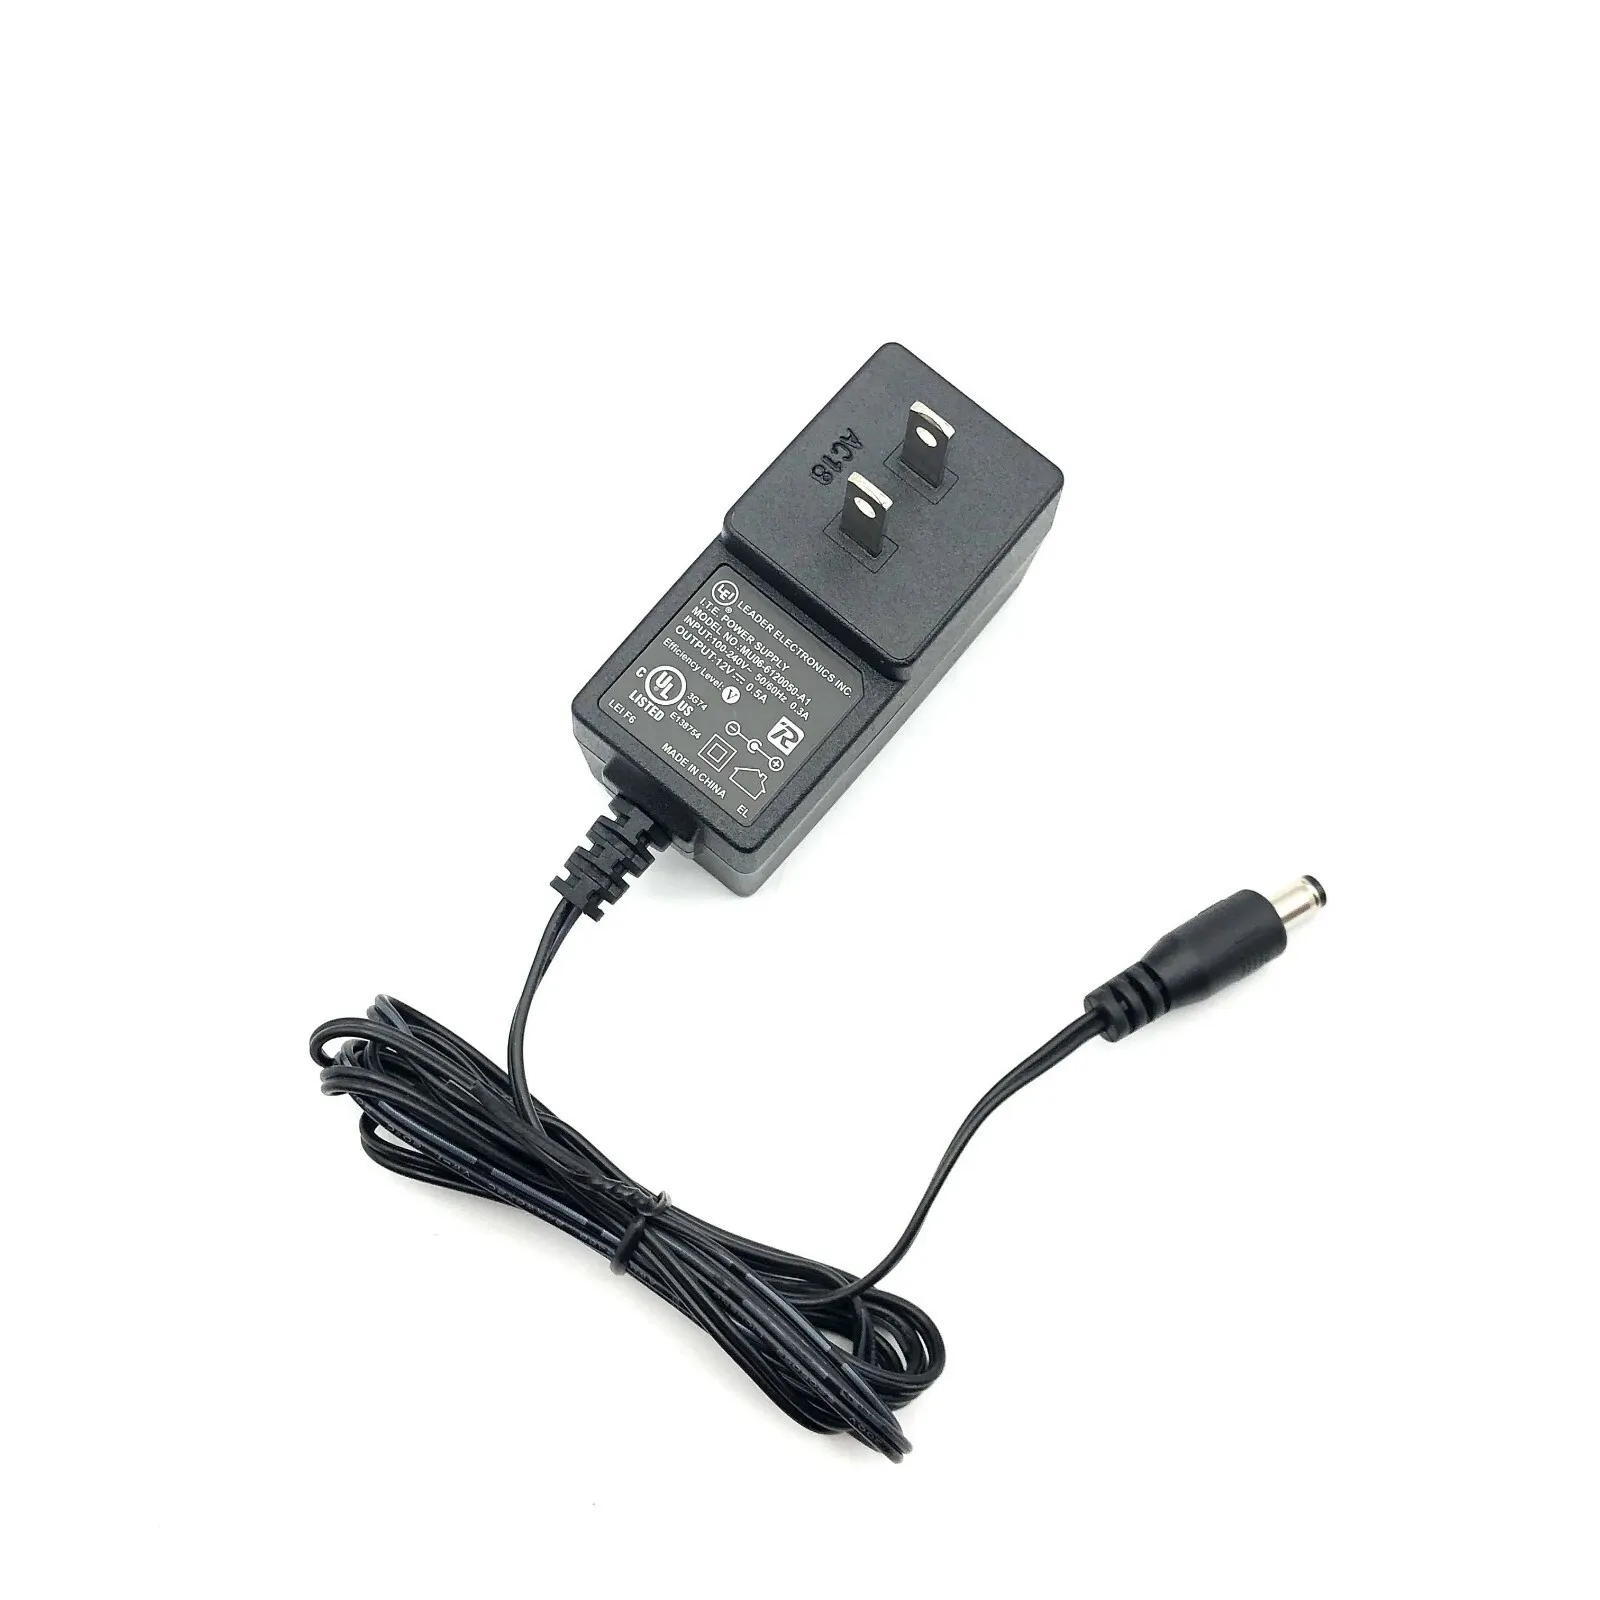 *Brand NEW*LEI 12V 0.5A AC Adapter MU06-6120050-A1 for t.bone IEM 75 / TWS 16 PT / free solo HT / free solo PT